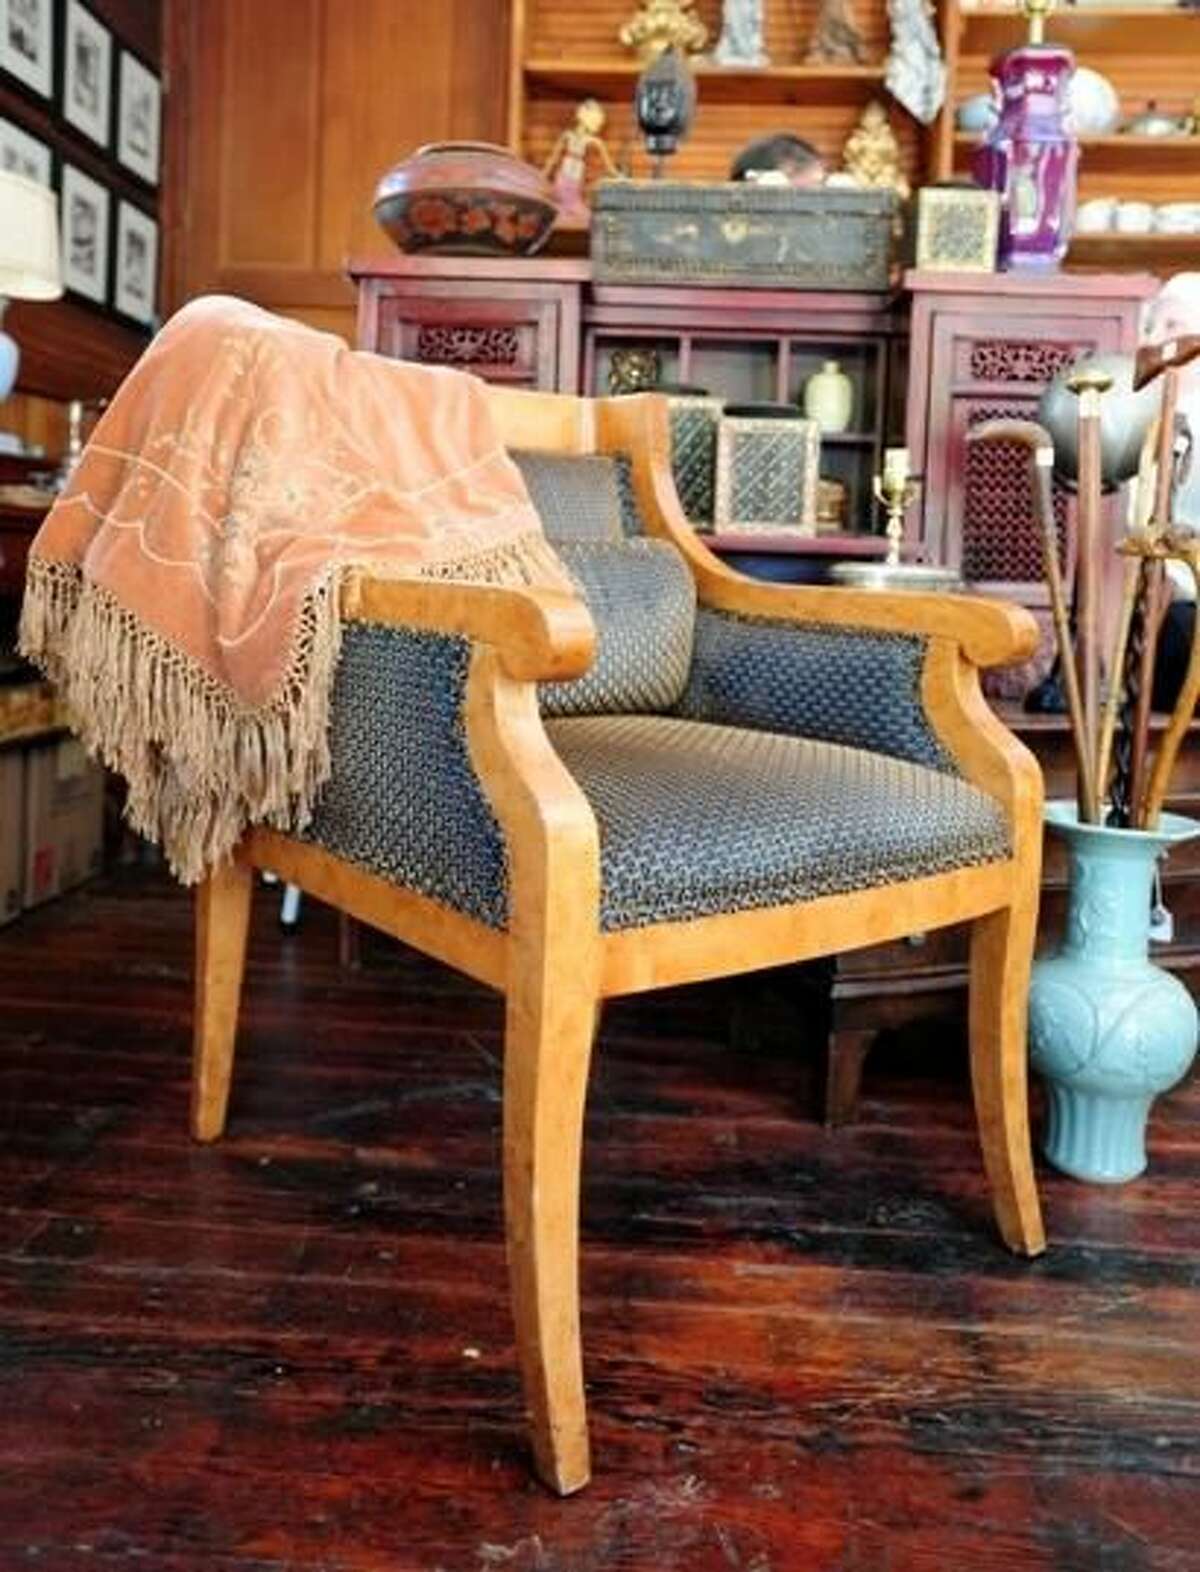 A chair that was in character Craig Morton's apartment and also the Metro nightclub on "As the World Turns," and is now in the Amenia, N.Y., shop Donegan's Doneag'ins. Photo by Laurie Gaboardi.